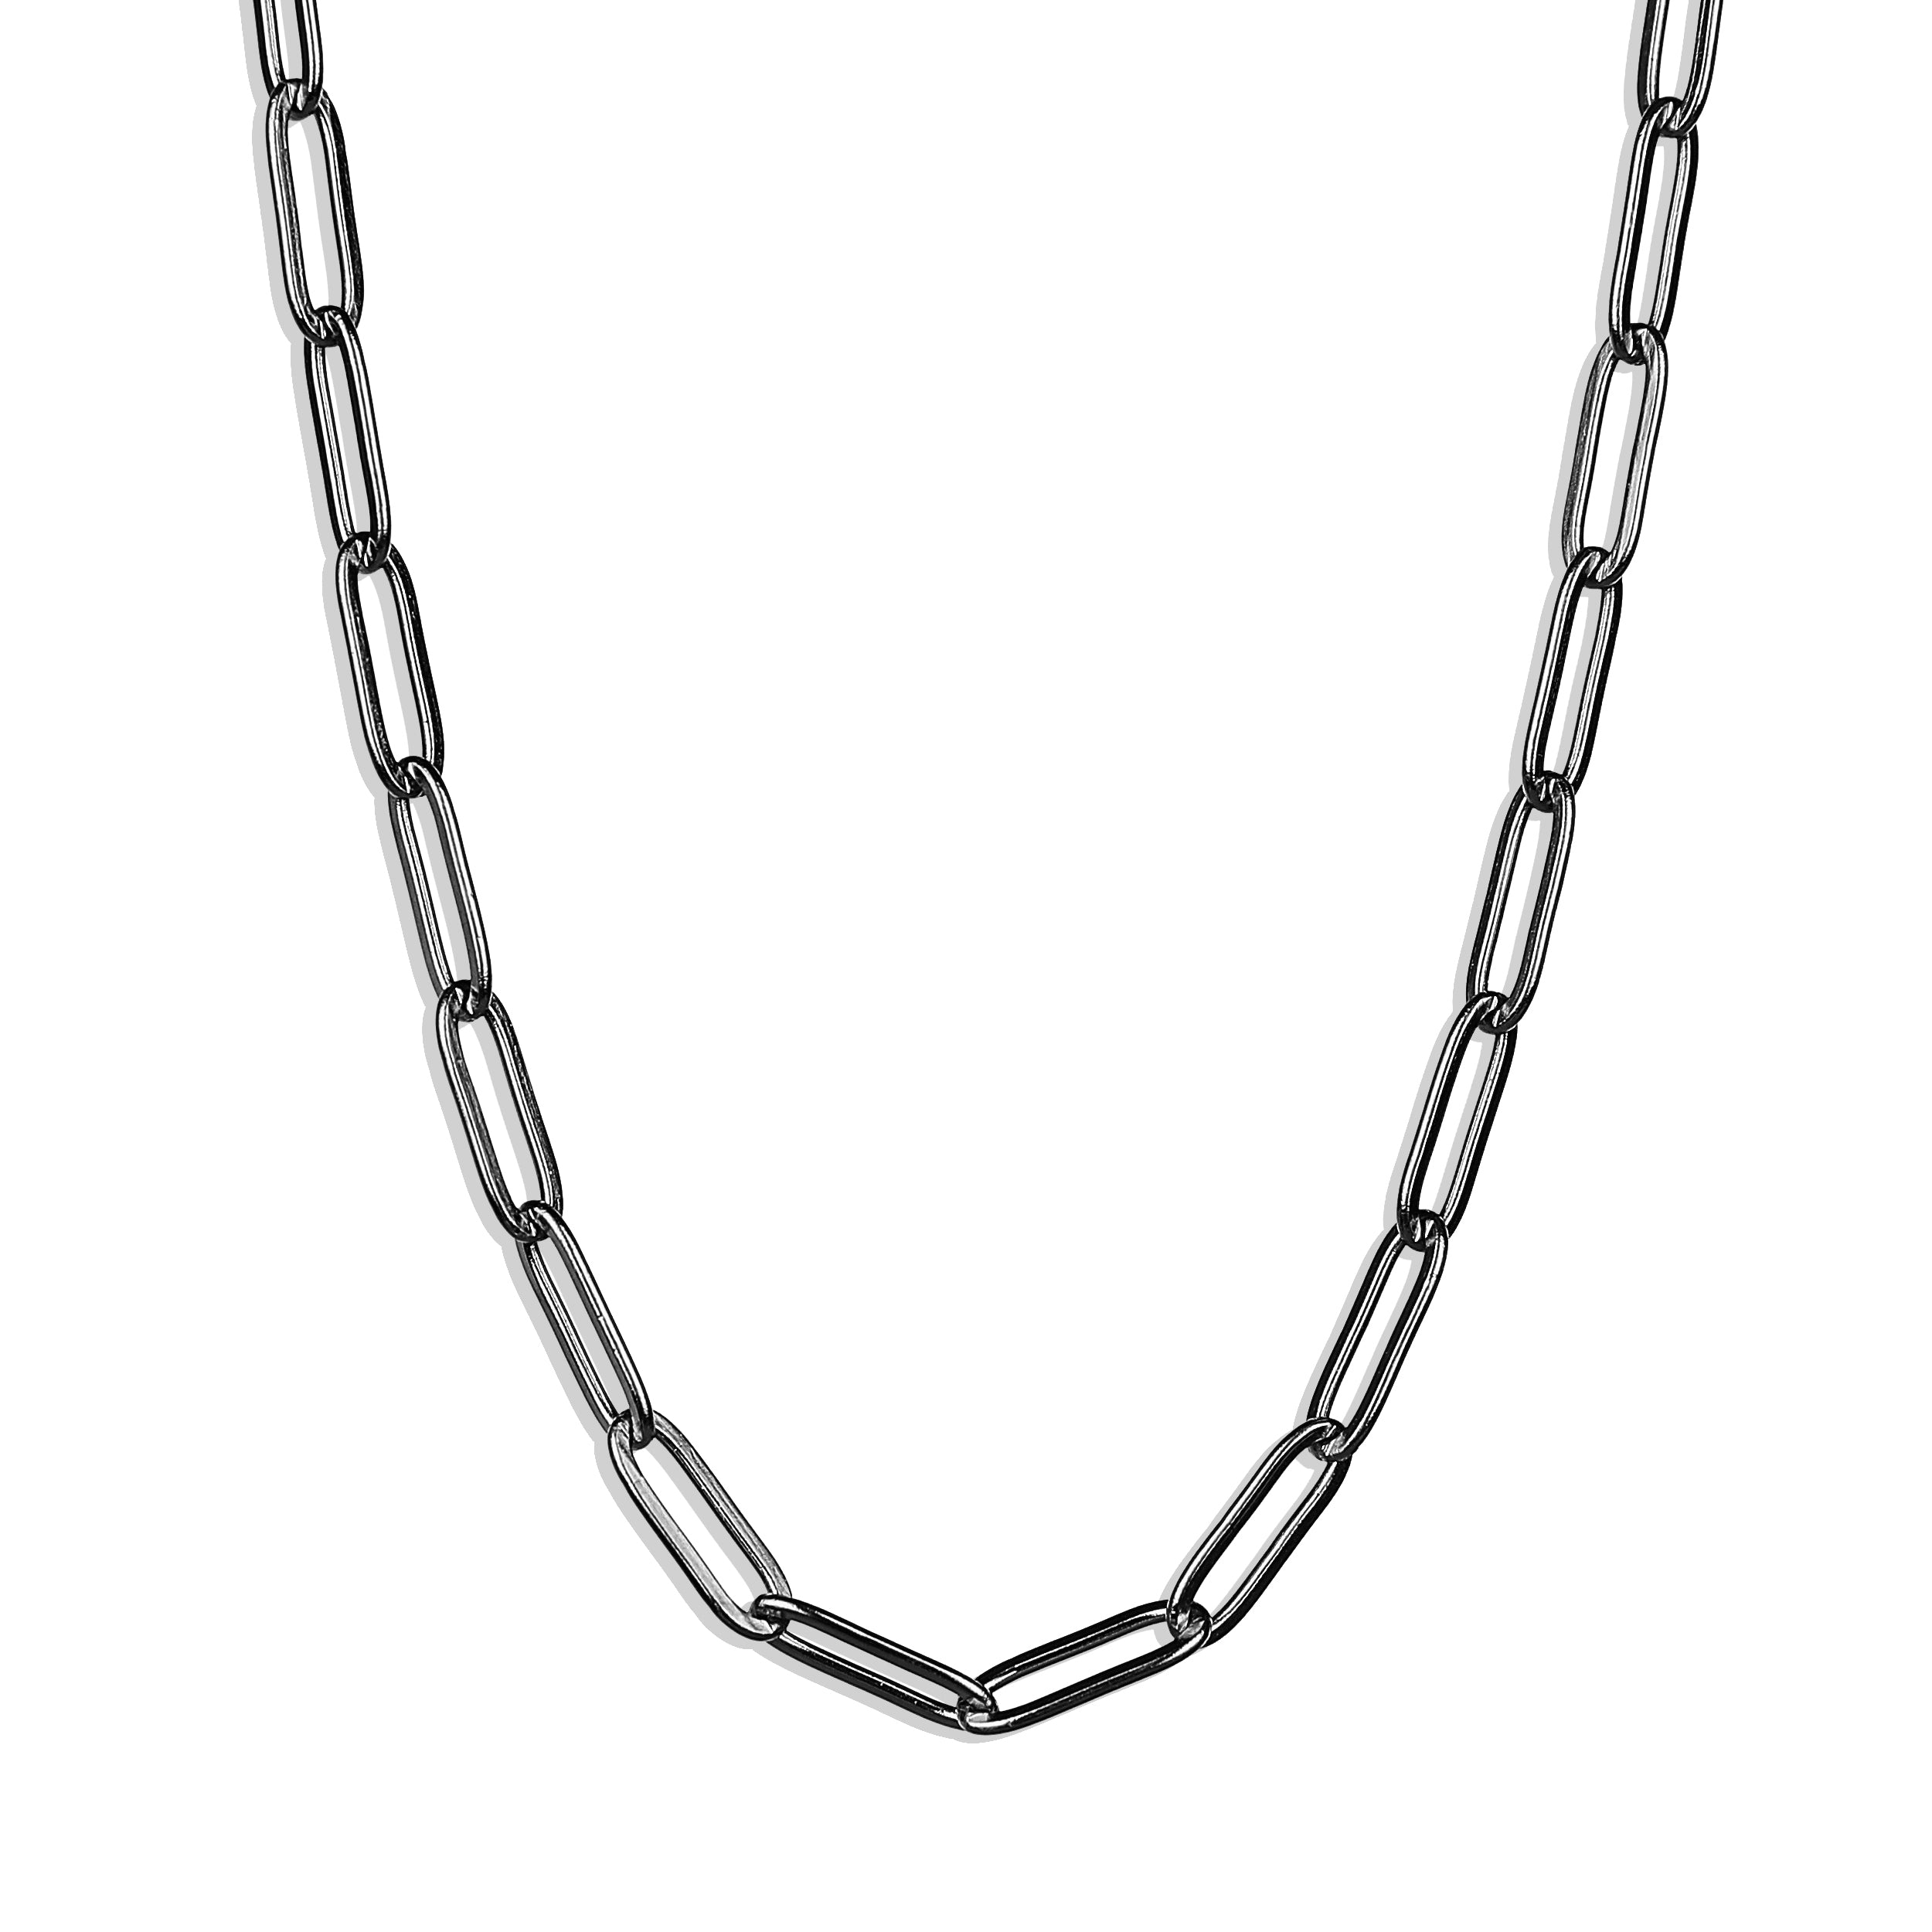 Drawn Cable Chain - Silver 4mm